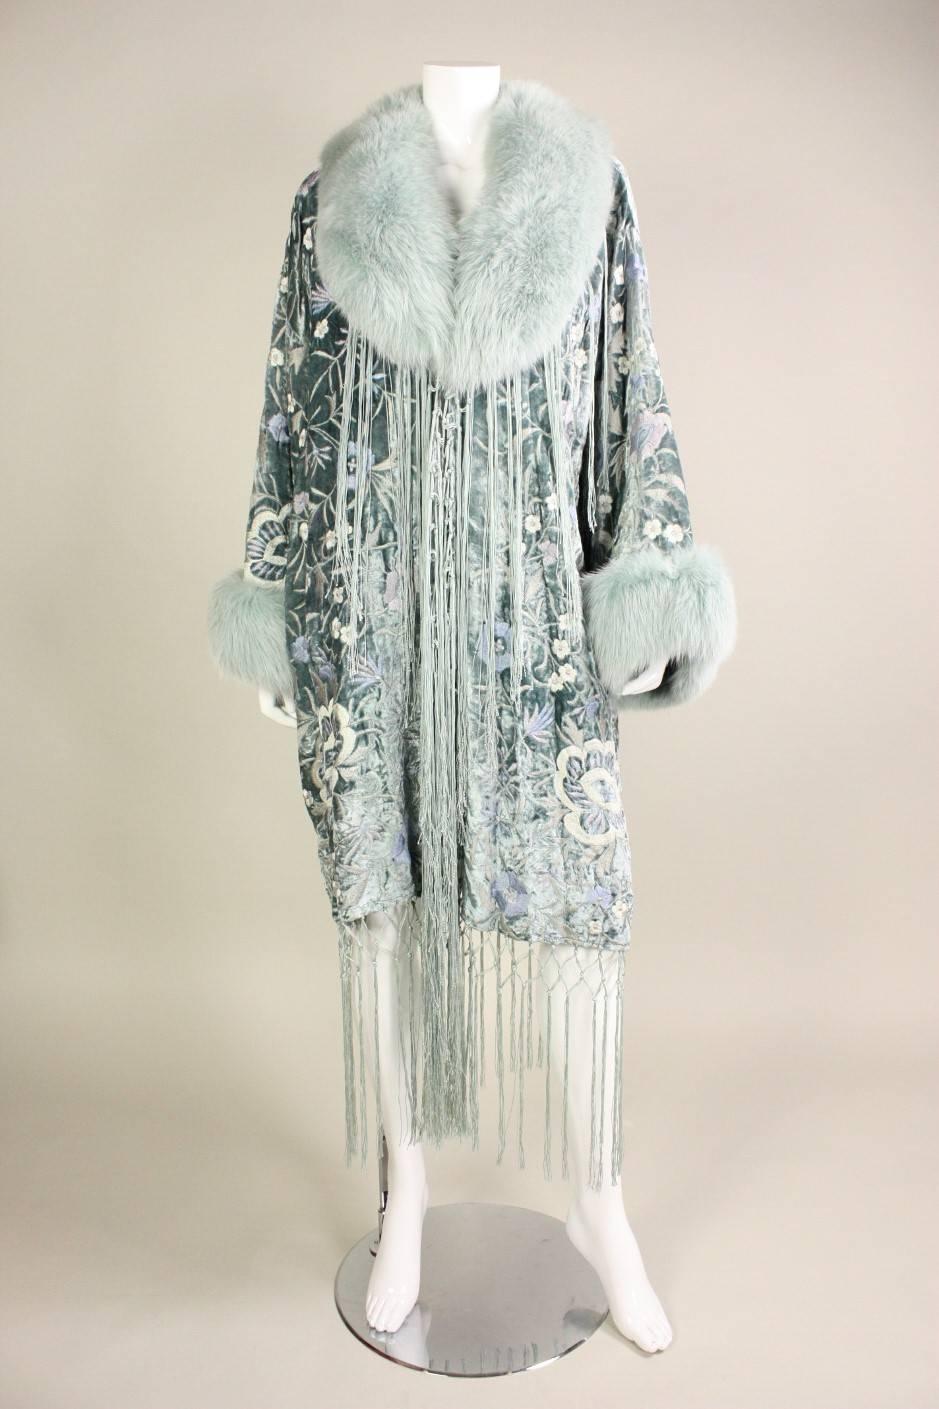 Vintage coat from Adrienne Landau dates to the 1990's and retailed at Bergdorf Goodman.  It is made of light blue velvet with floral embroidery in pastel shades.  Norwegian fox fur trim has been dyed an icy blue.   Knotted fringe trim.  Fully lined.